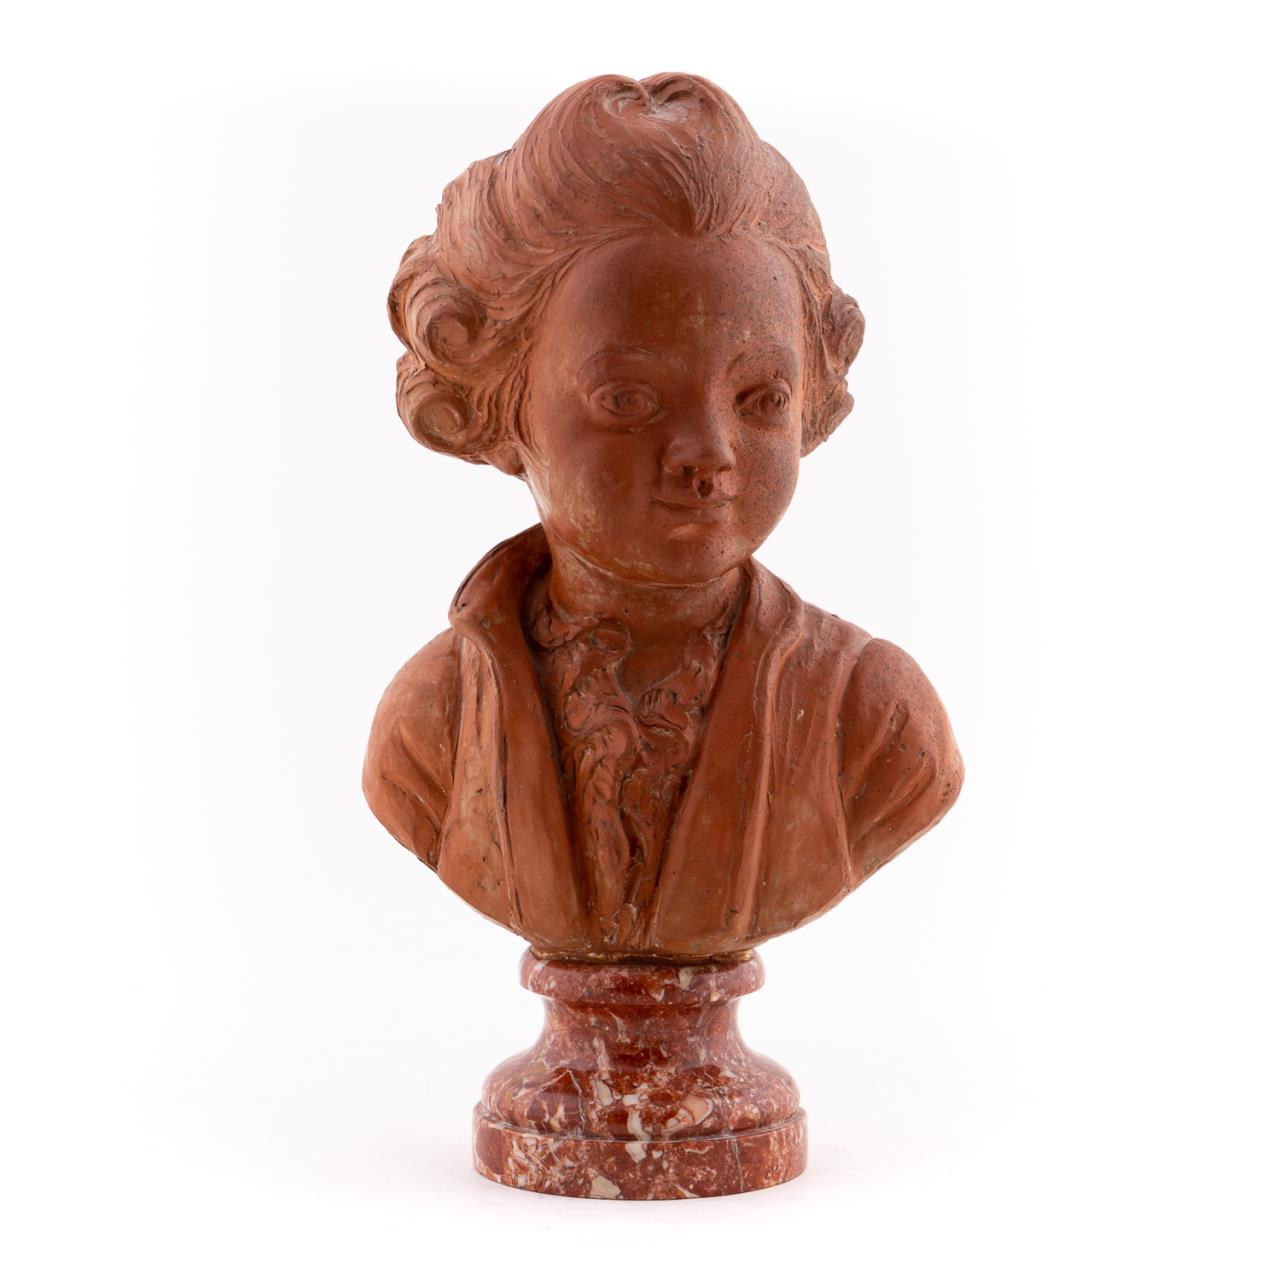 TERRACOTTA BUST OF A BOY, YOUNG